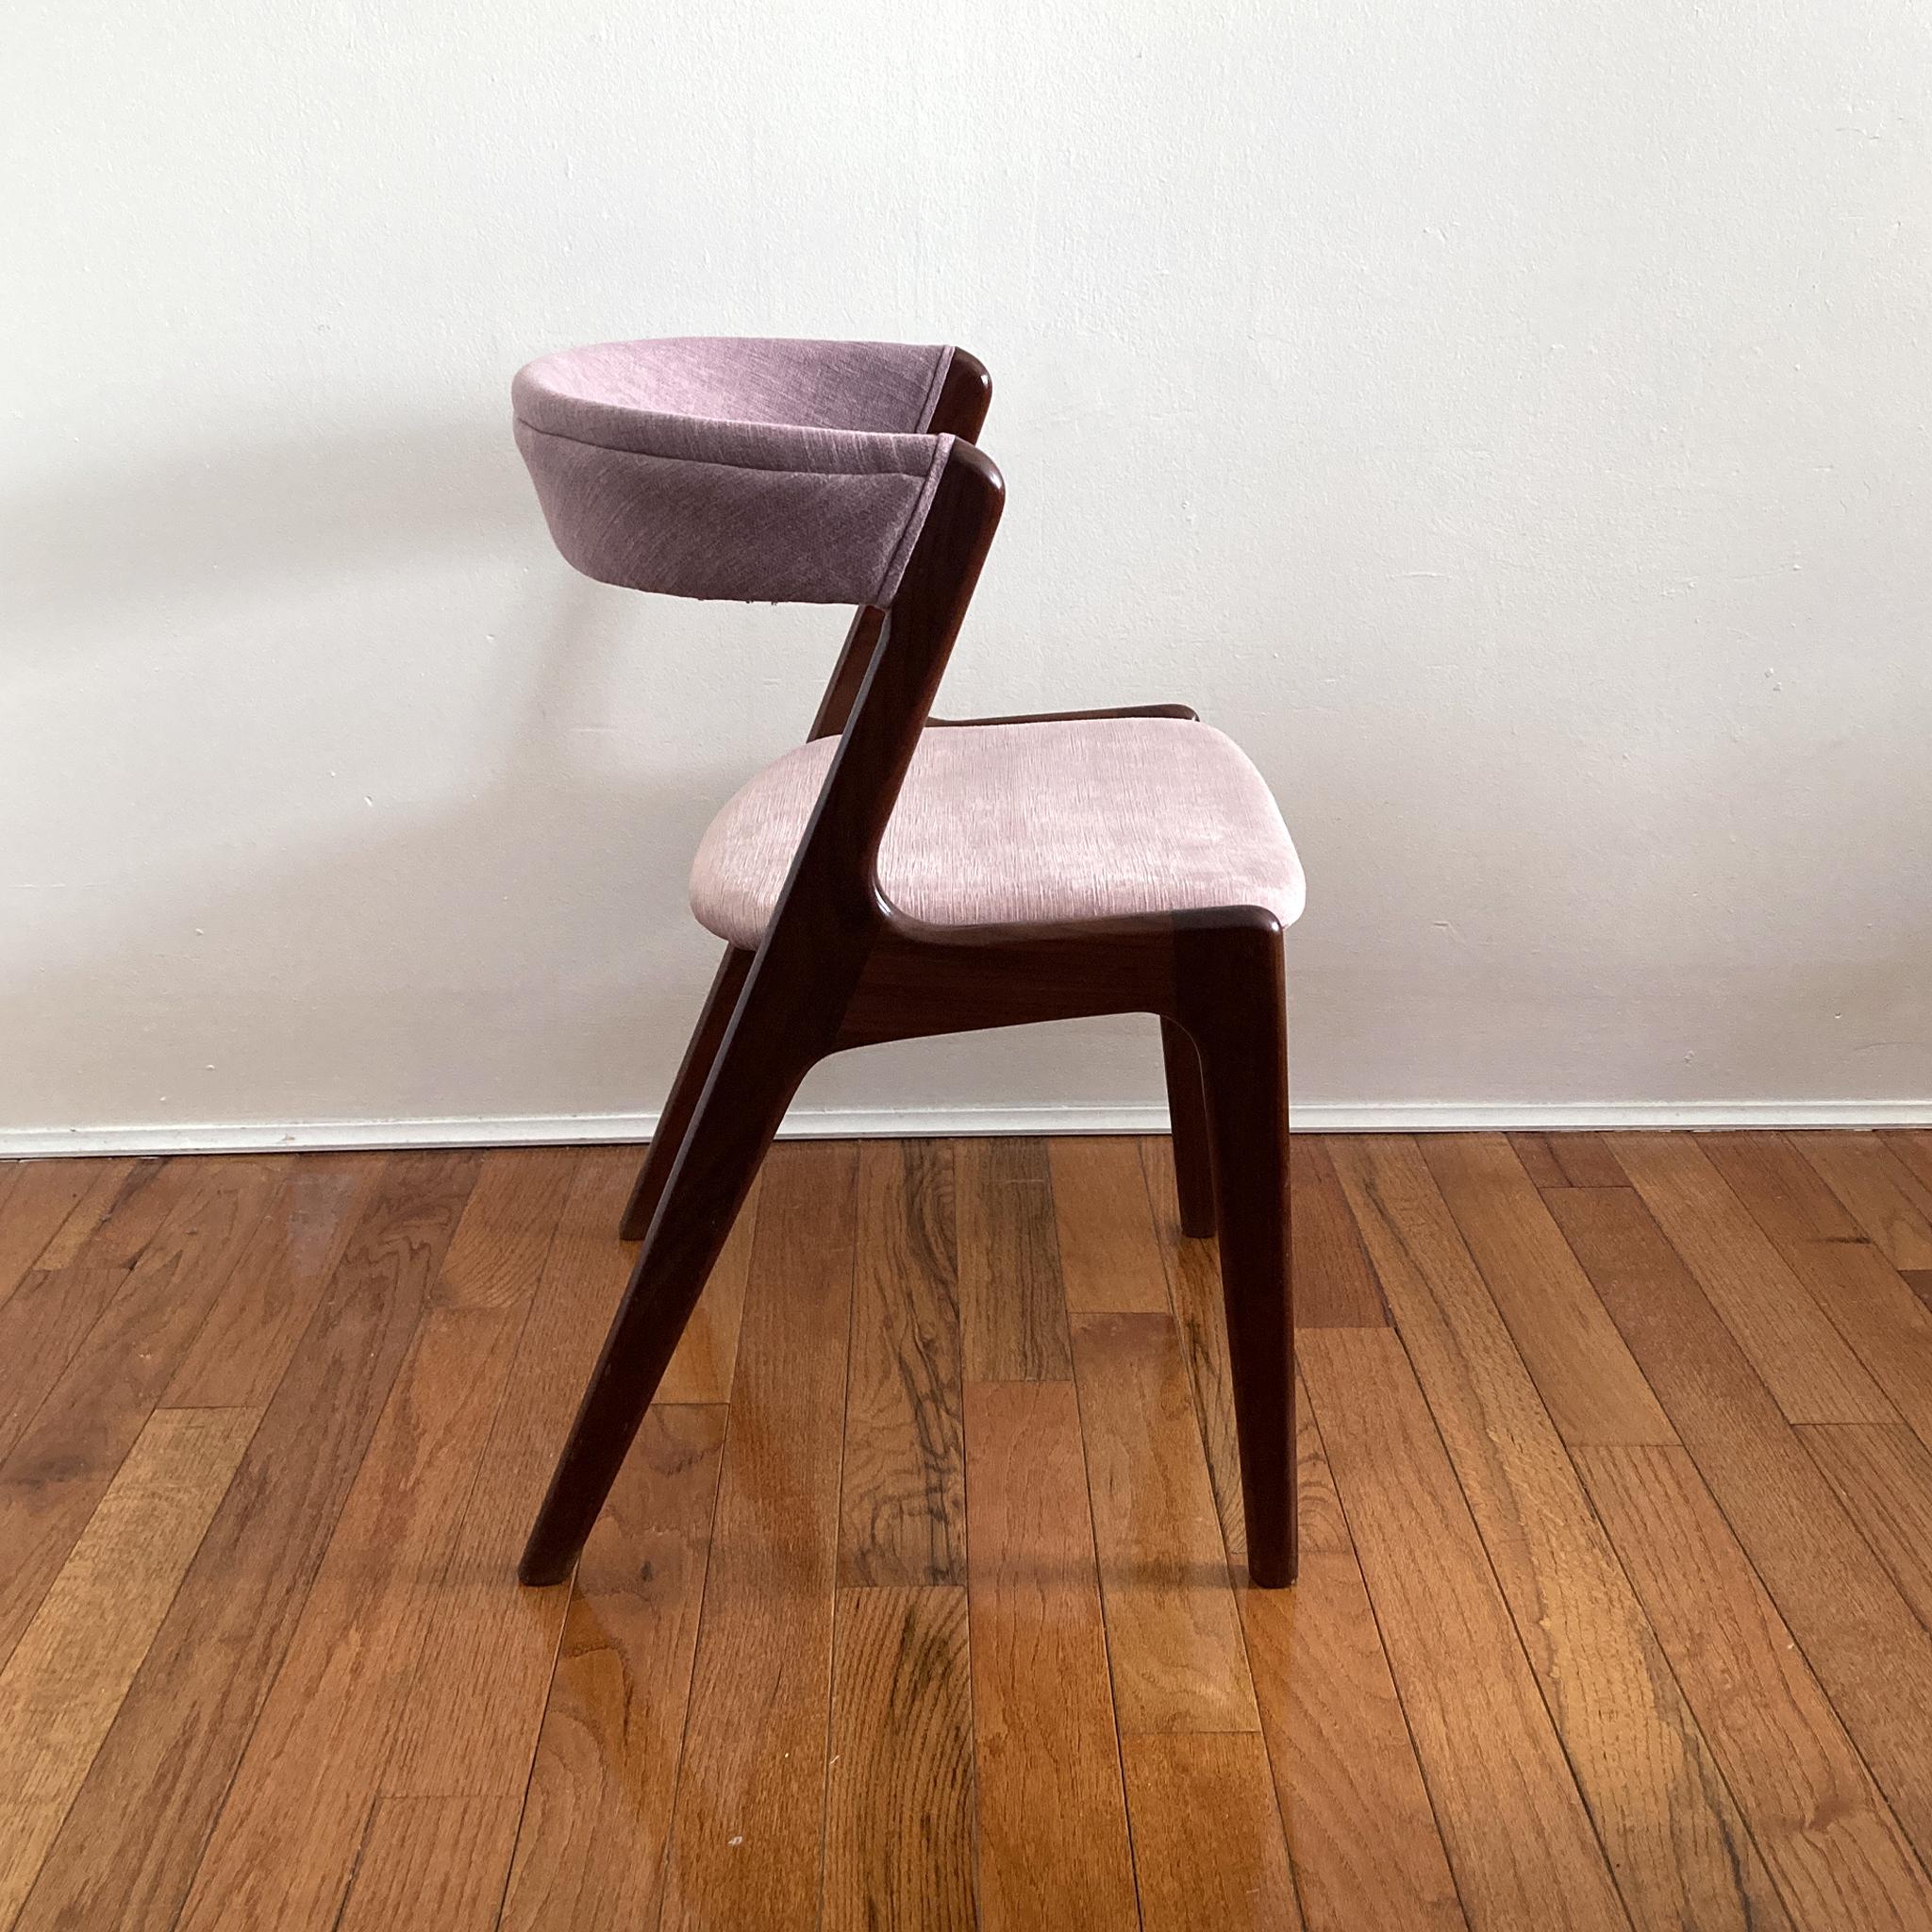 Danish Kai Kristiansen Mauve Pink Curved Back Chair, 1960s For Sale